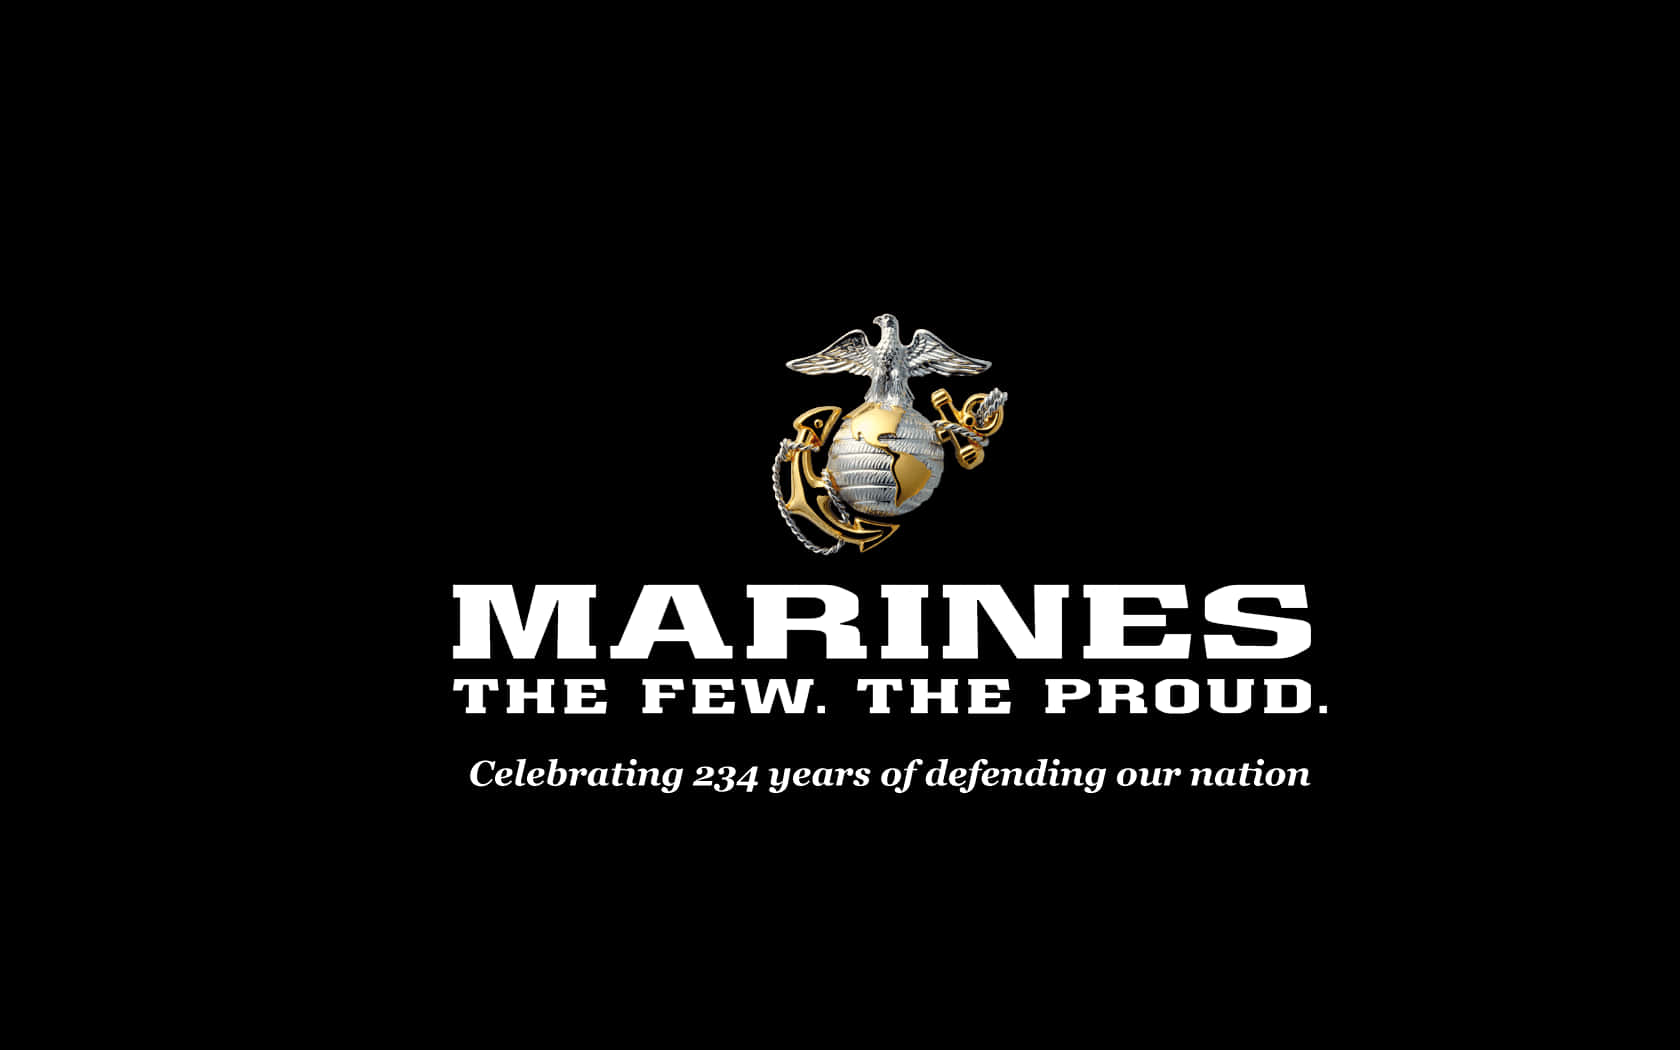 Marine Corps Wallpaper and Screensavers 53 images